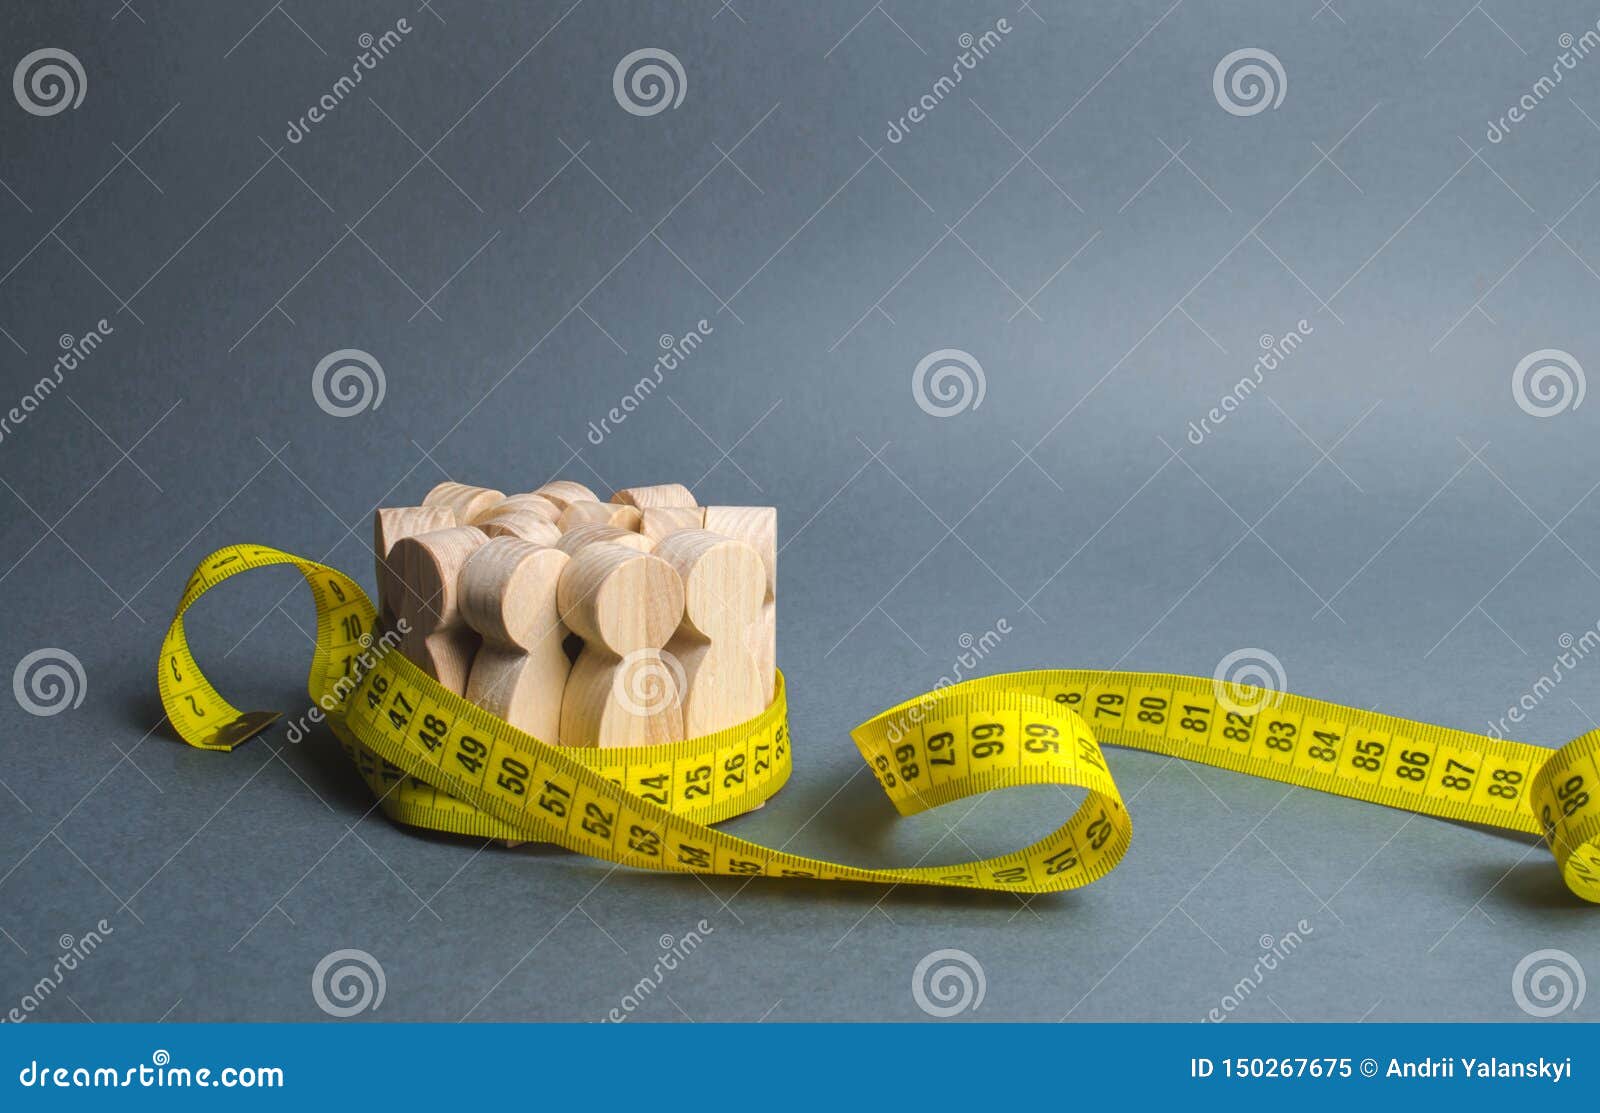 a crowd of wooden figures gripped by measuring tape. information statistics, measurement of the number, trends of population